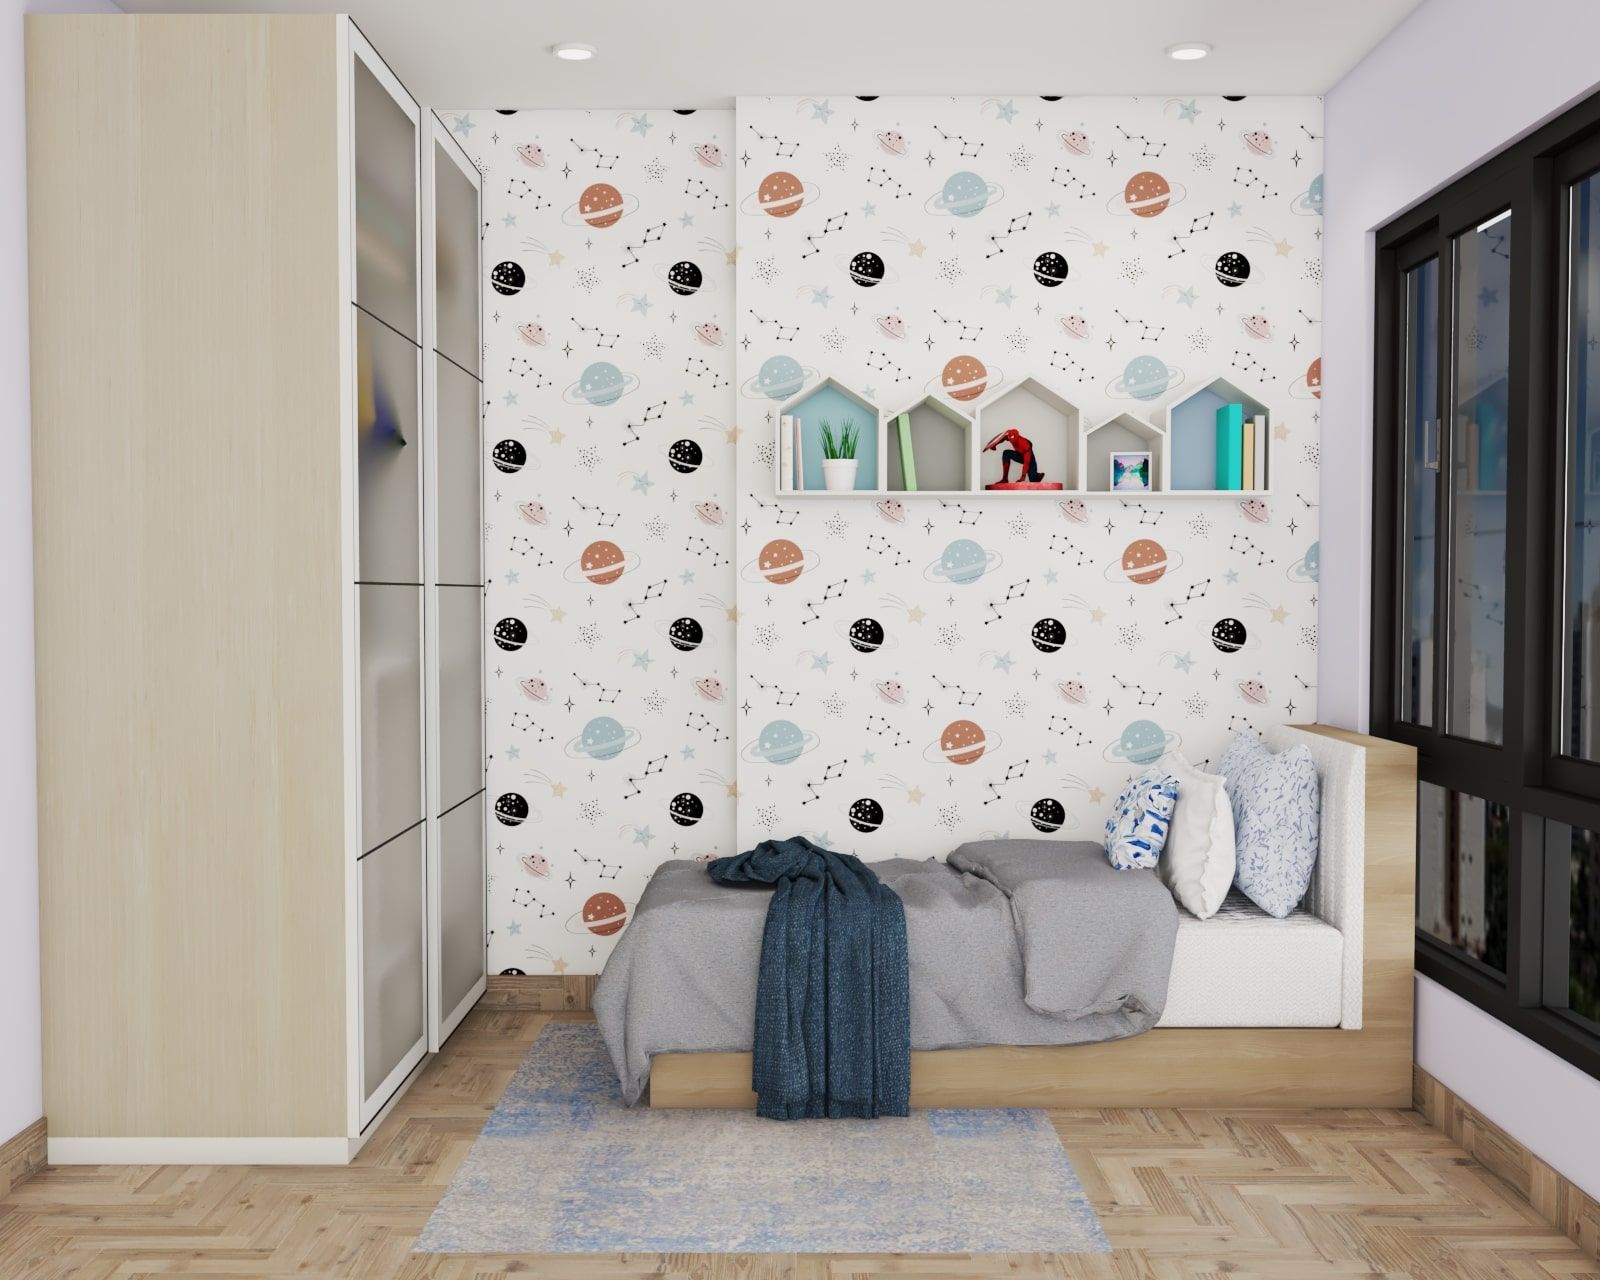 Modern Style Compact Kid's Bedroom Design With A Galaxy Theme